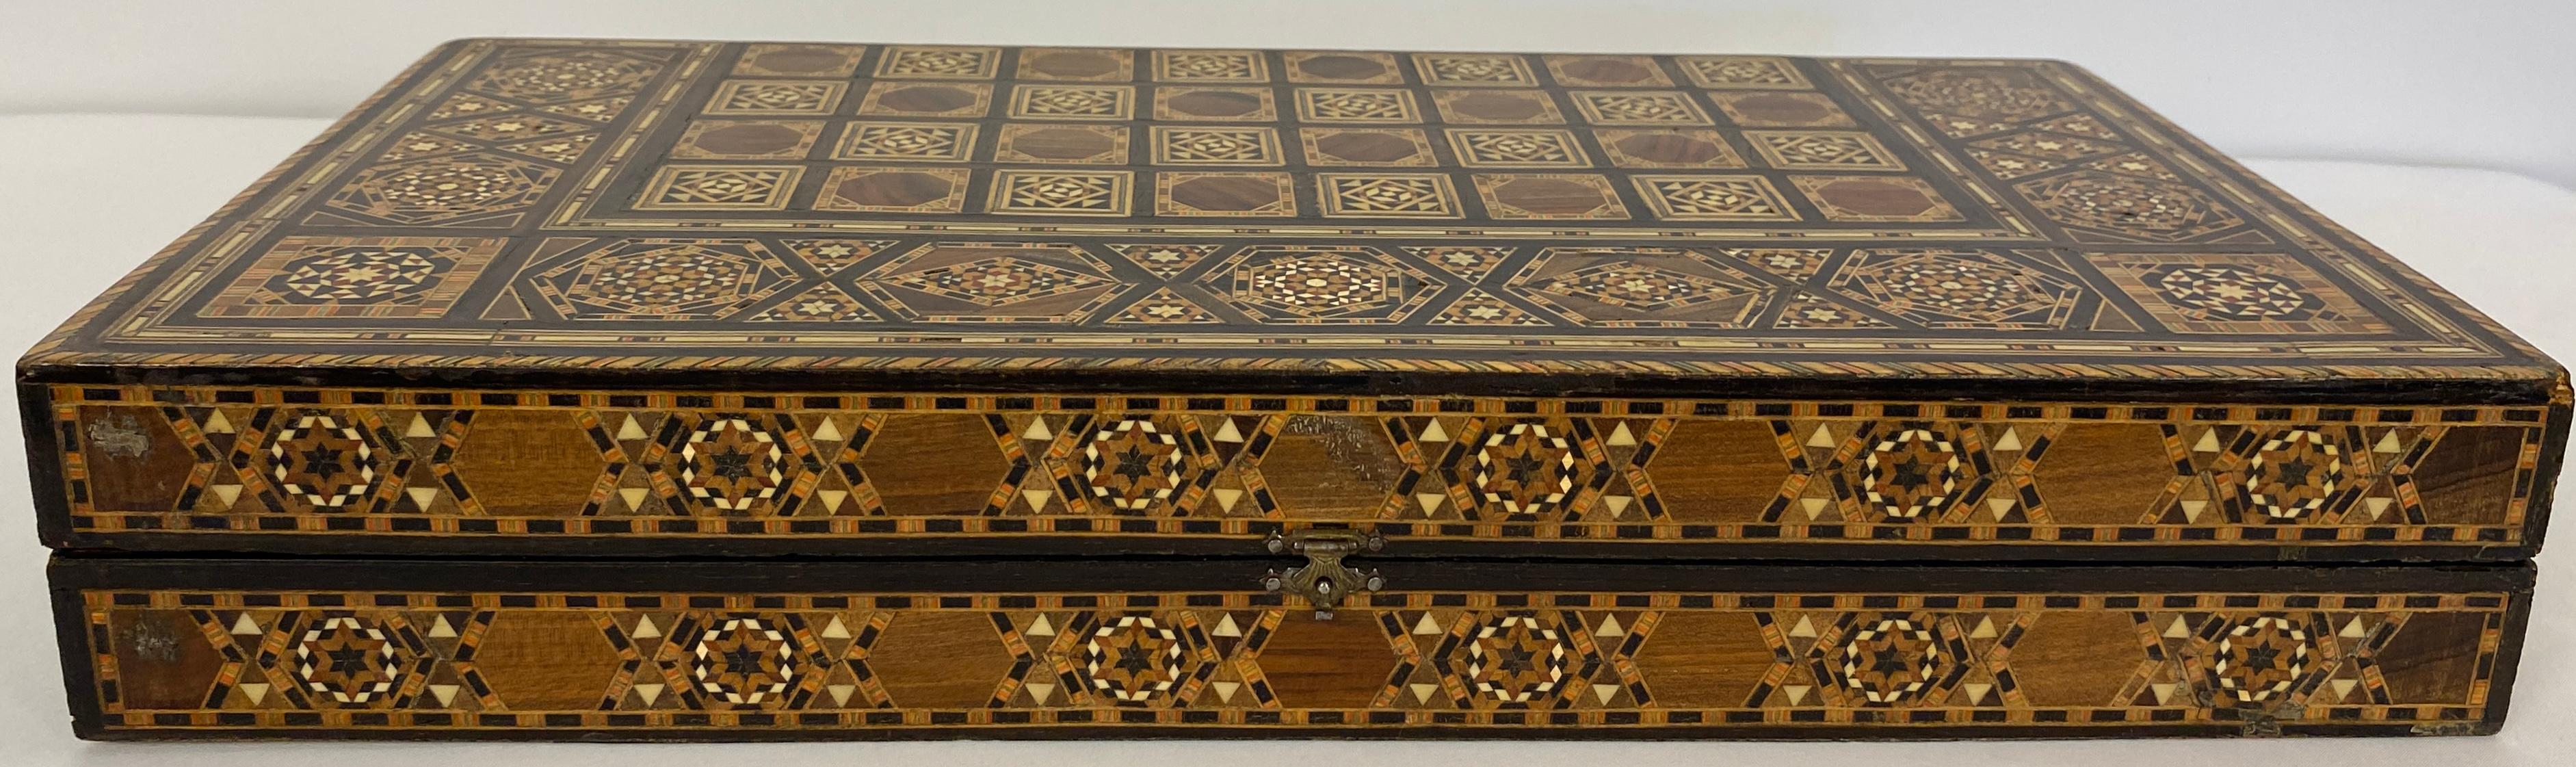 Stunning mosaic Backgammon set featuring a traditional Syrian style design and fine craftsmanship. The board/ box is made of various woods, mother-of-pearl, and bone inlays. A genuine work of art. A set of backgammon pieces are included (possibly